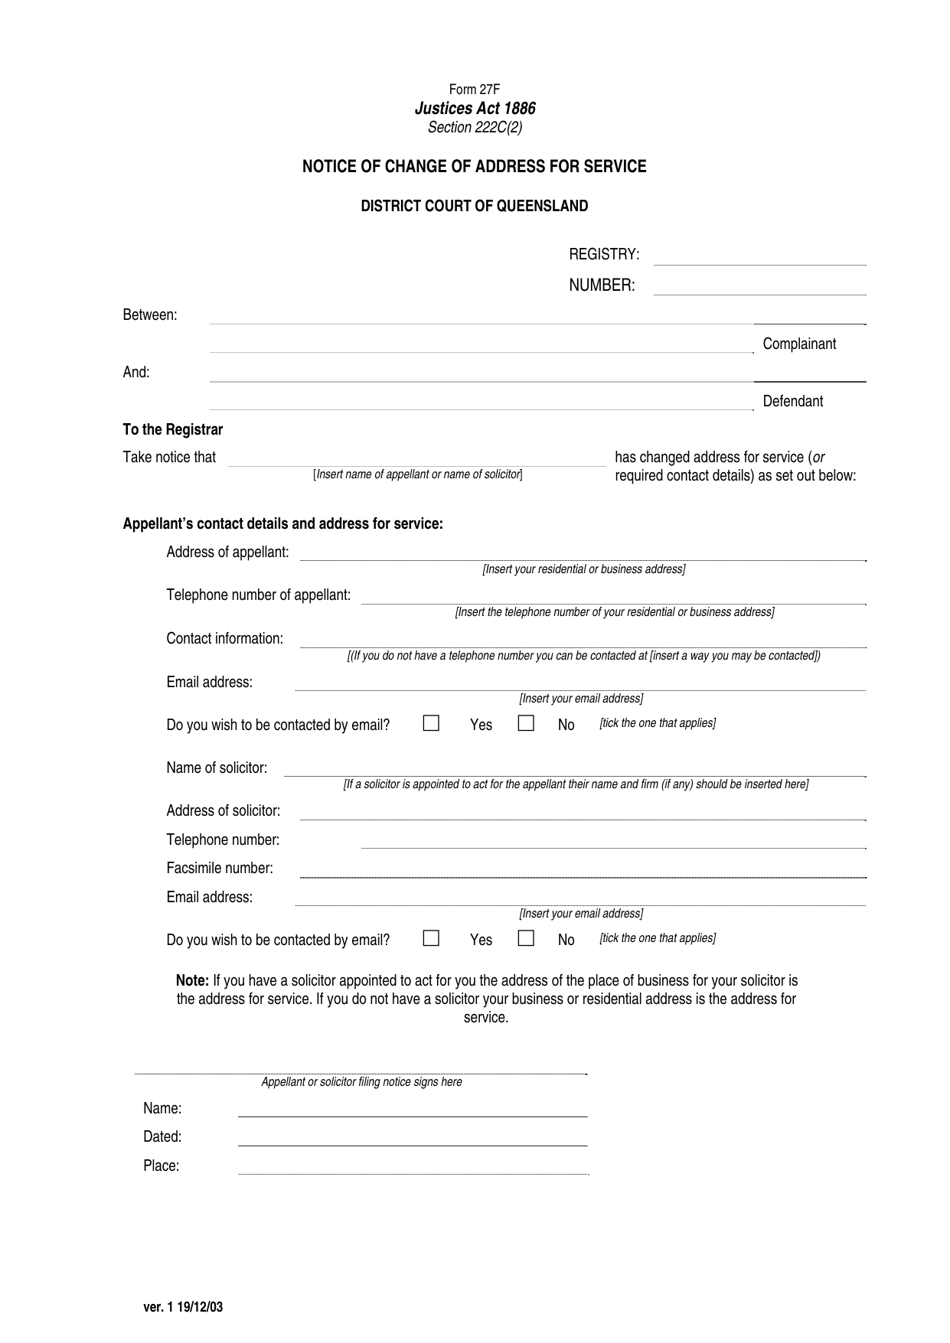 form-27f-fill-out-sign-online-and-download-printable-pdf-queensland